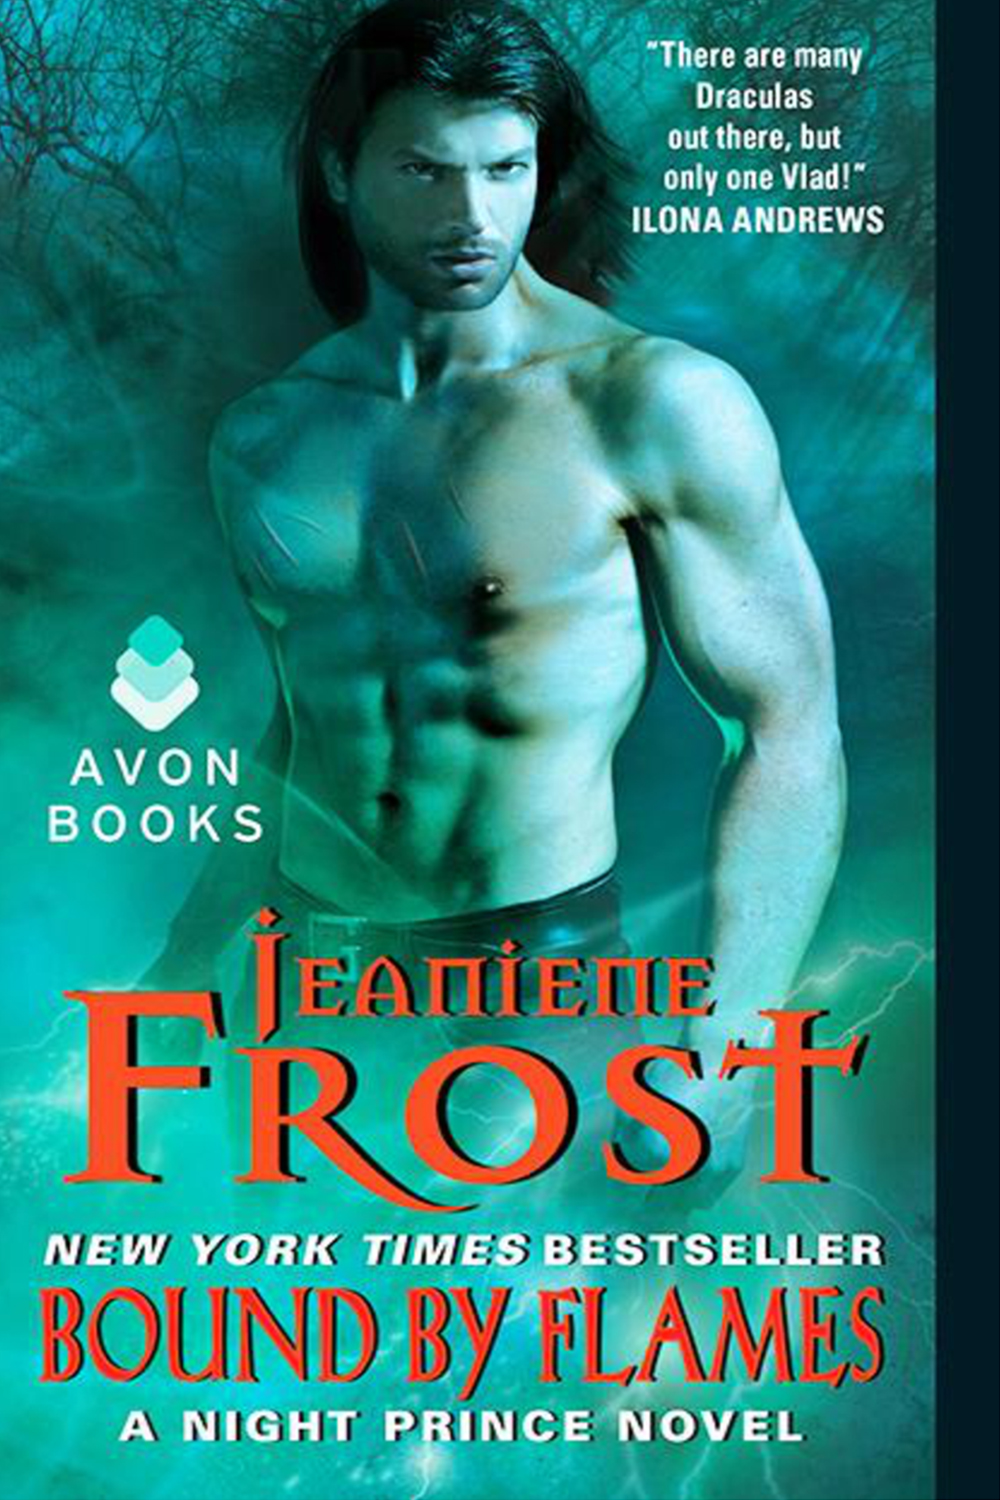 S1 E24 Bound by Flames by Jeaniene Frost